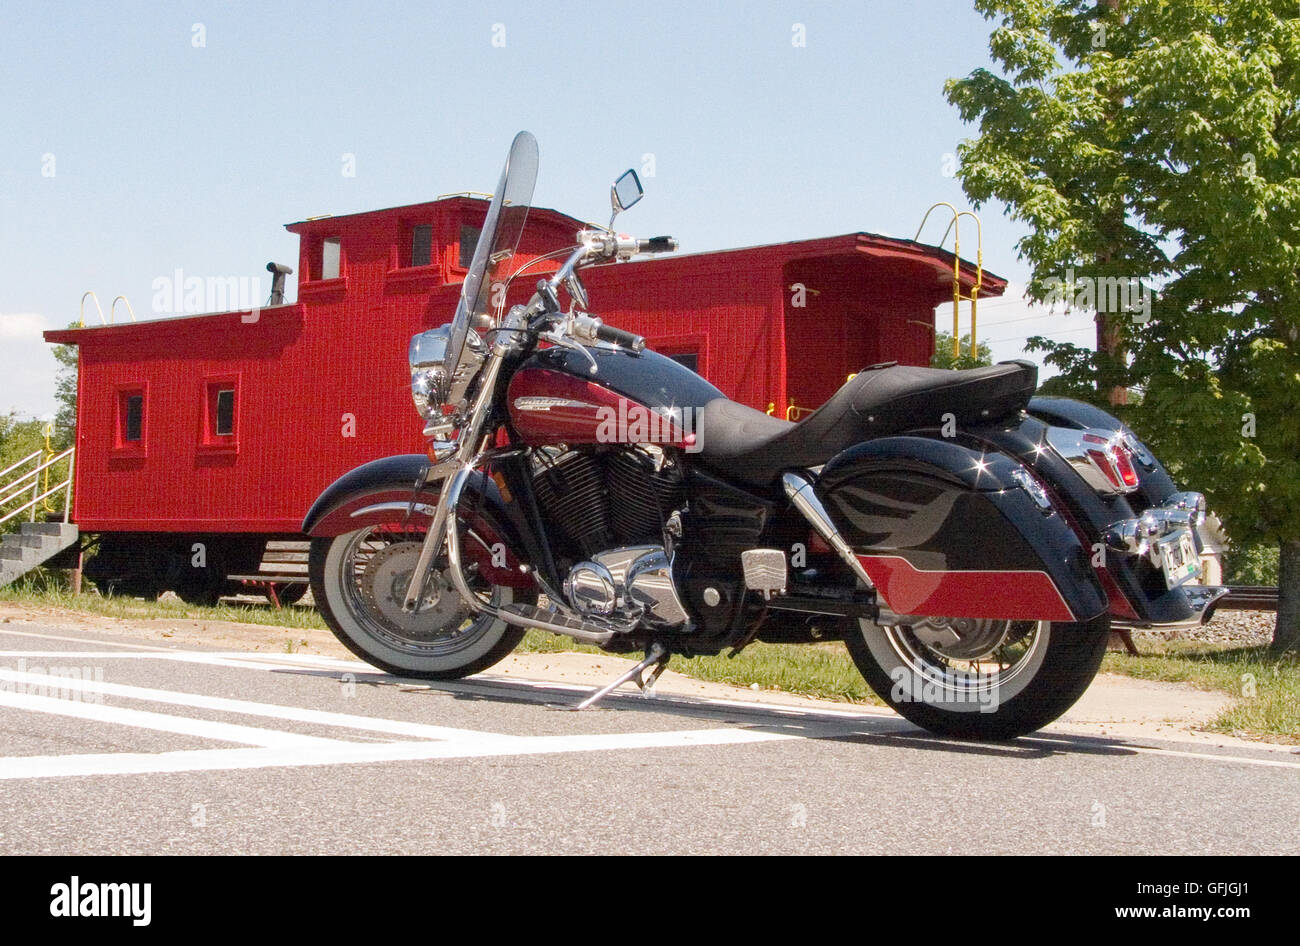 A beautiful cruiser-styled motorcycle is parked in front of a classic train caboose on display in Gainesville, Georgia. Stock Photo